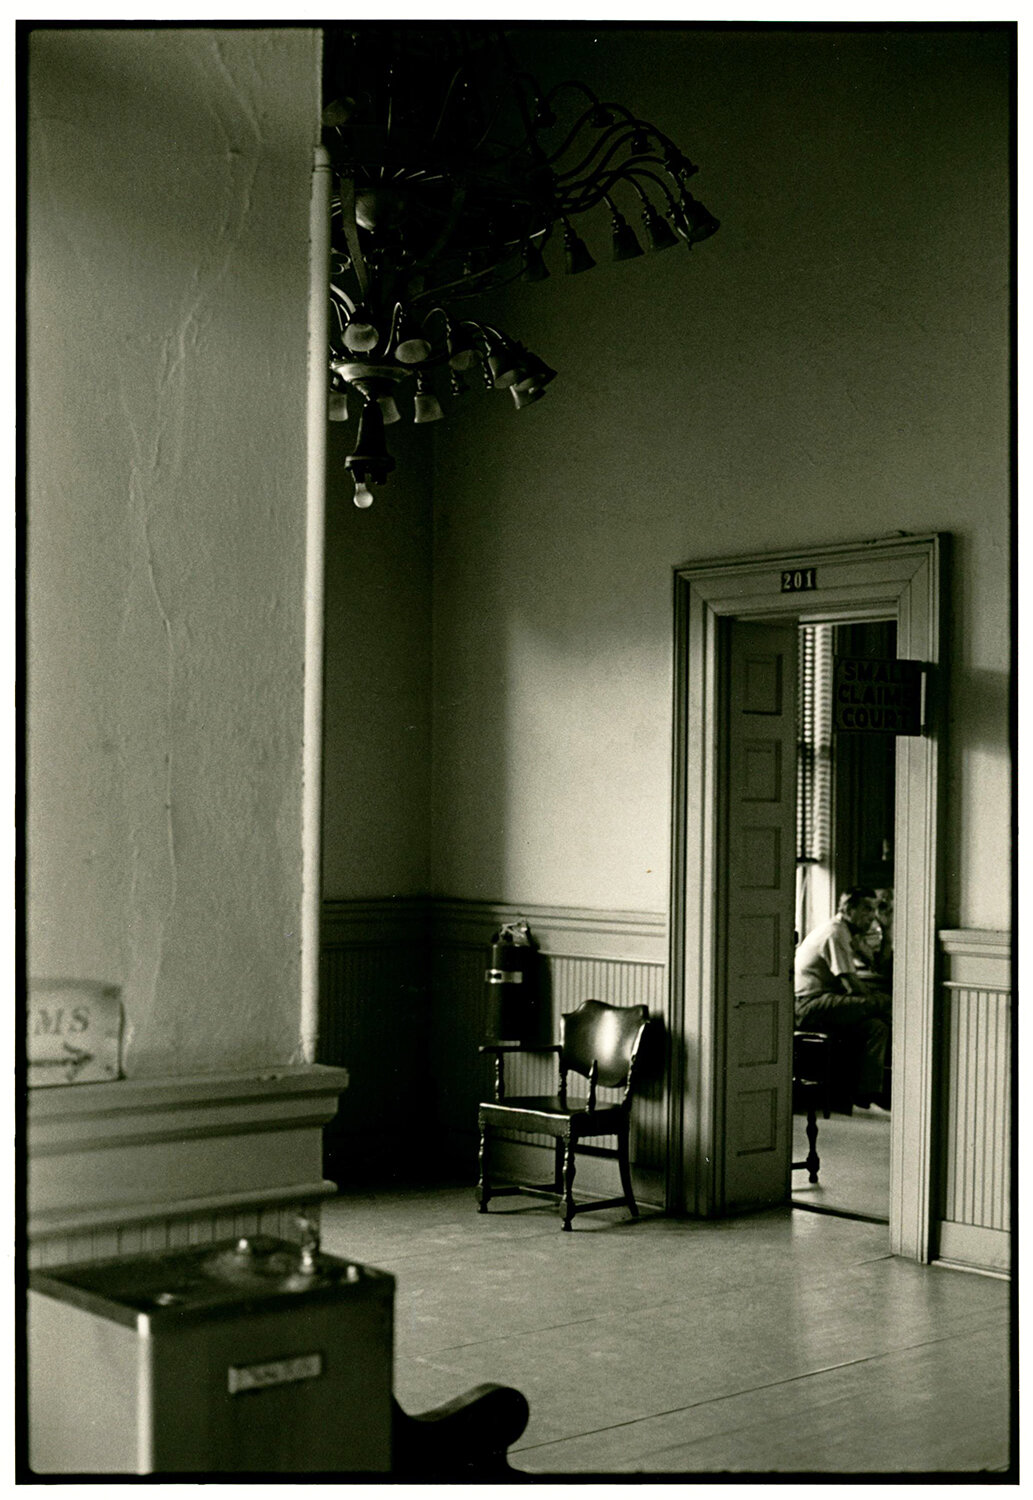   Lobby, second floor, Decatur County Courthouse , 1980 Silver Gelatin Print 14 x 11 in. (paper size) The Do Good Fund, Inc., 2017-77 